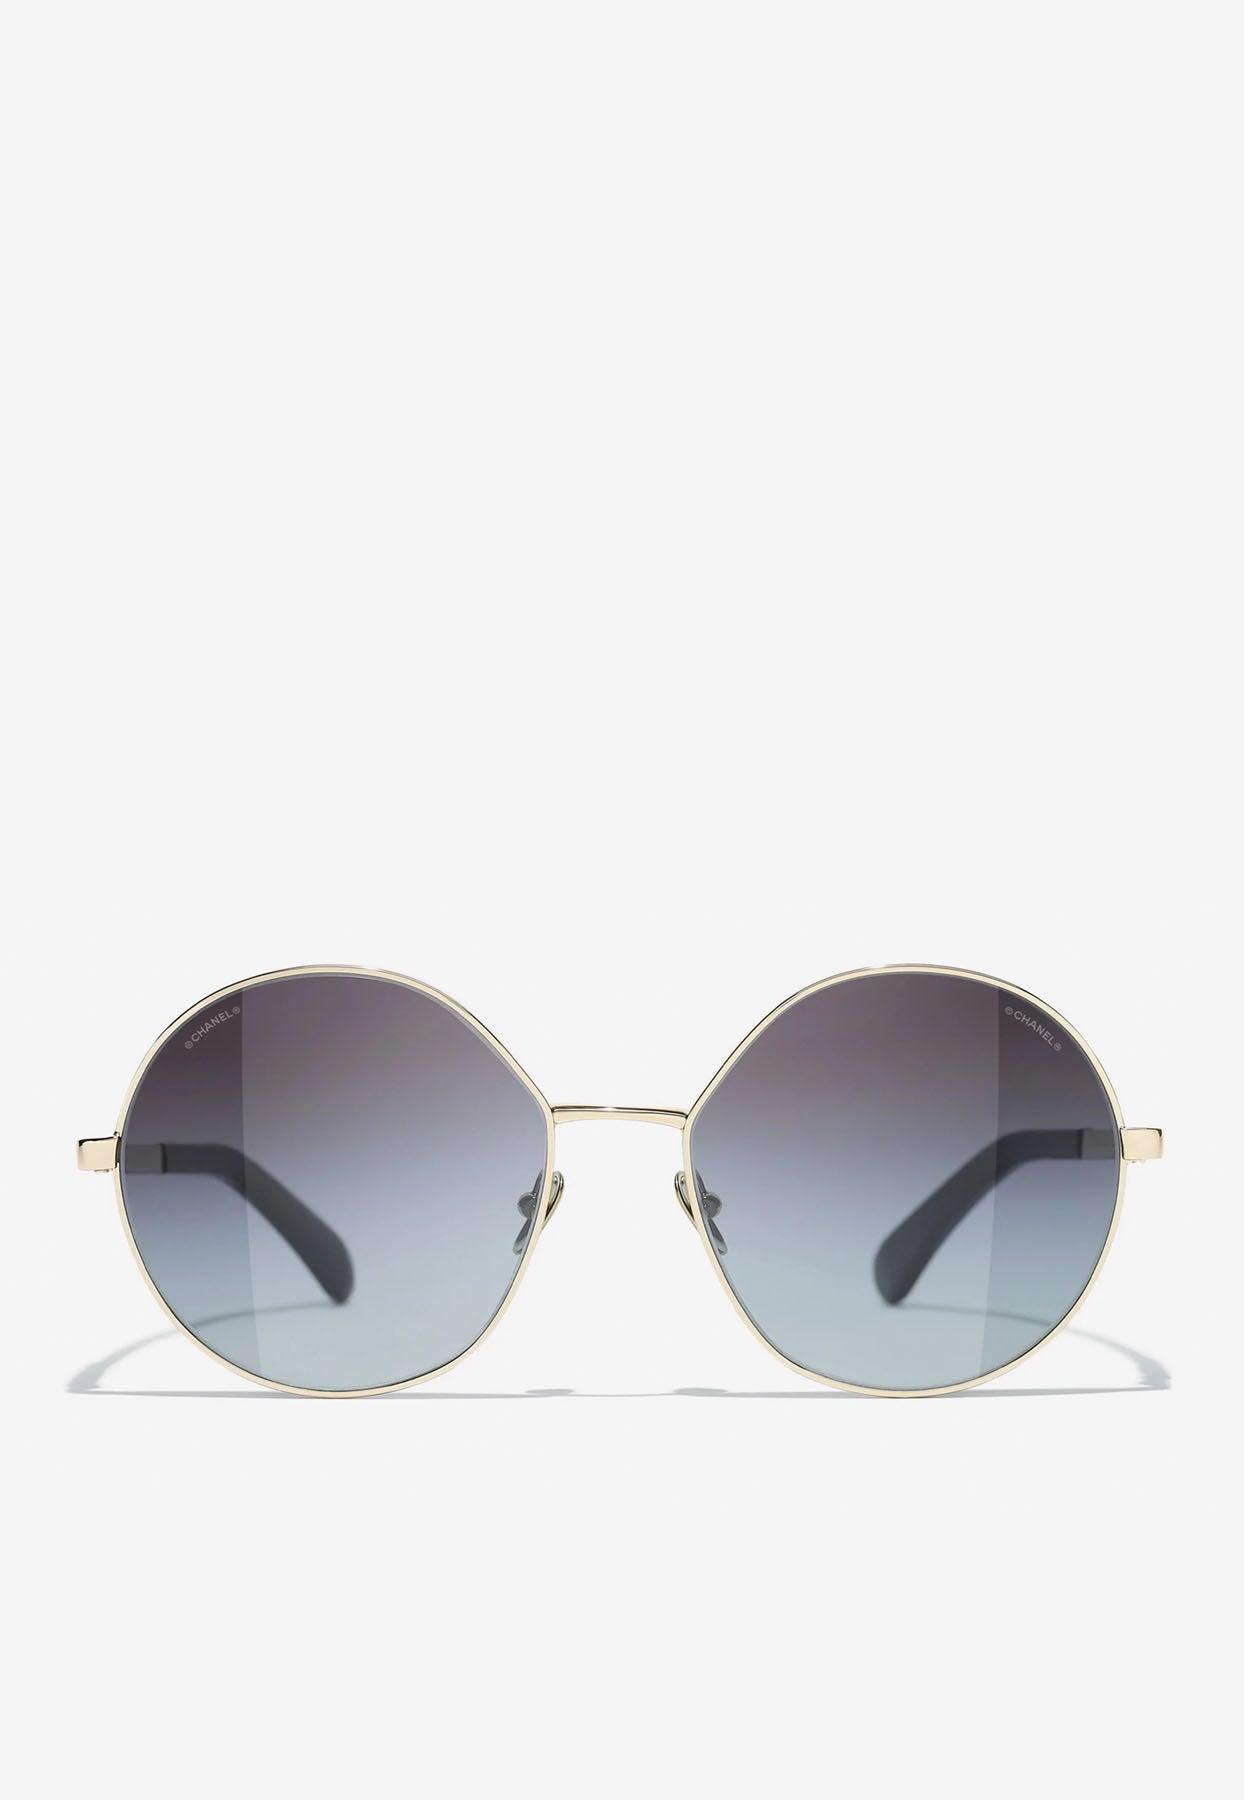 Chanel Round Metal Sunglasses in Gray | Lyst